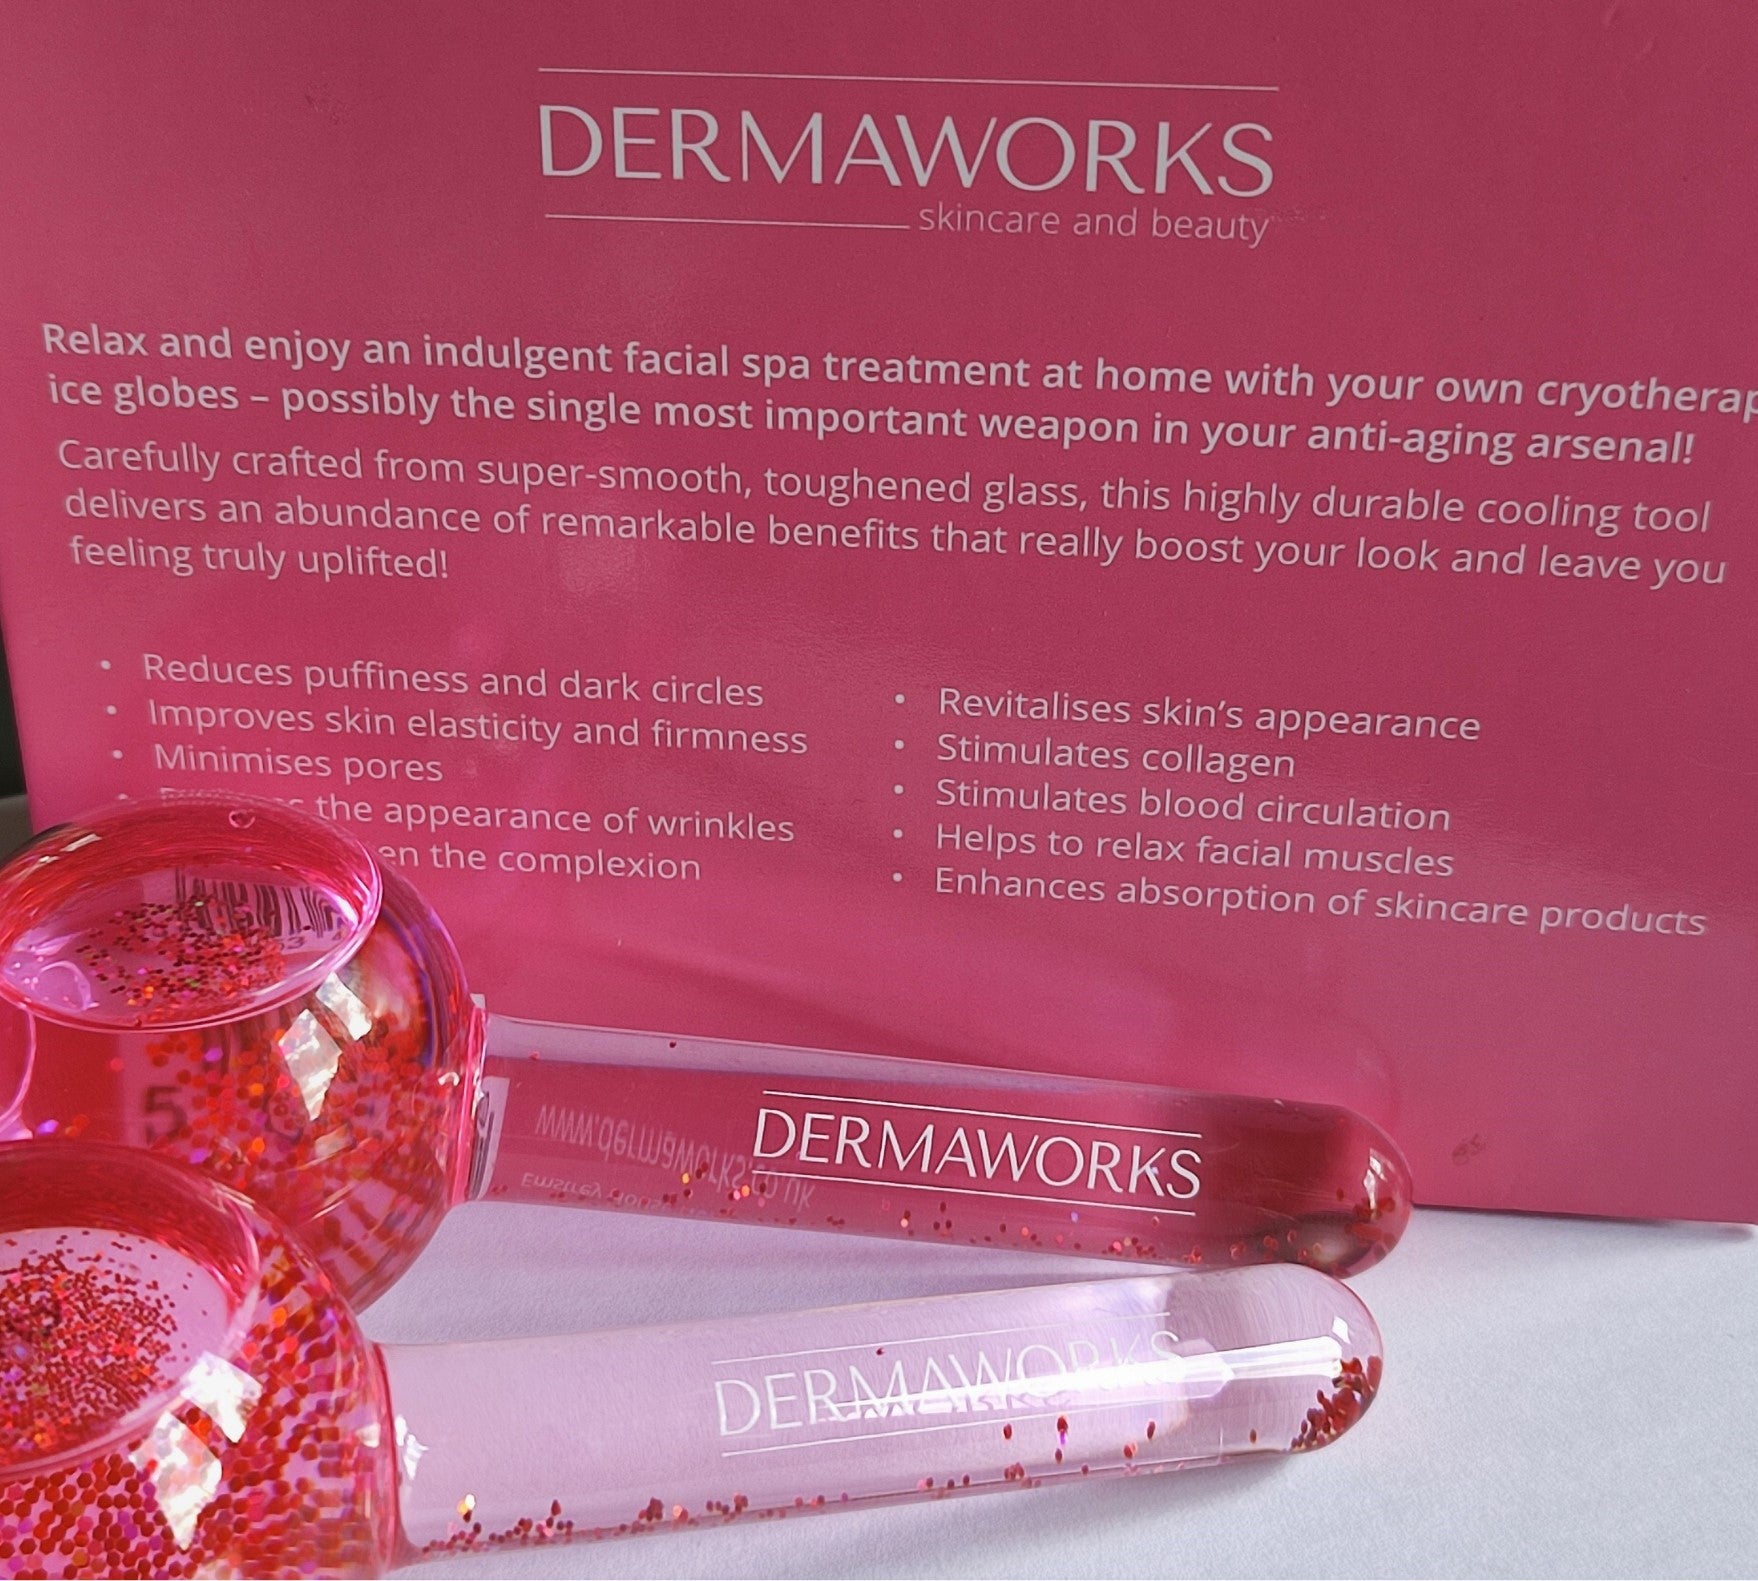 Dermaworks facial ice roller, or ice globes for face and eyes. Collagen boosting, stress and headache relief skin care tool.